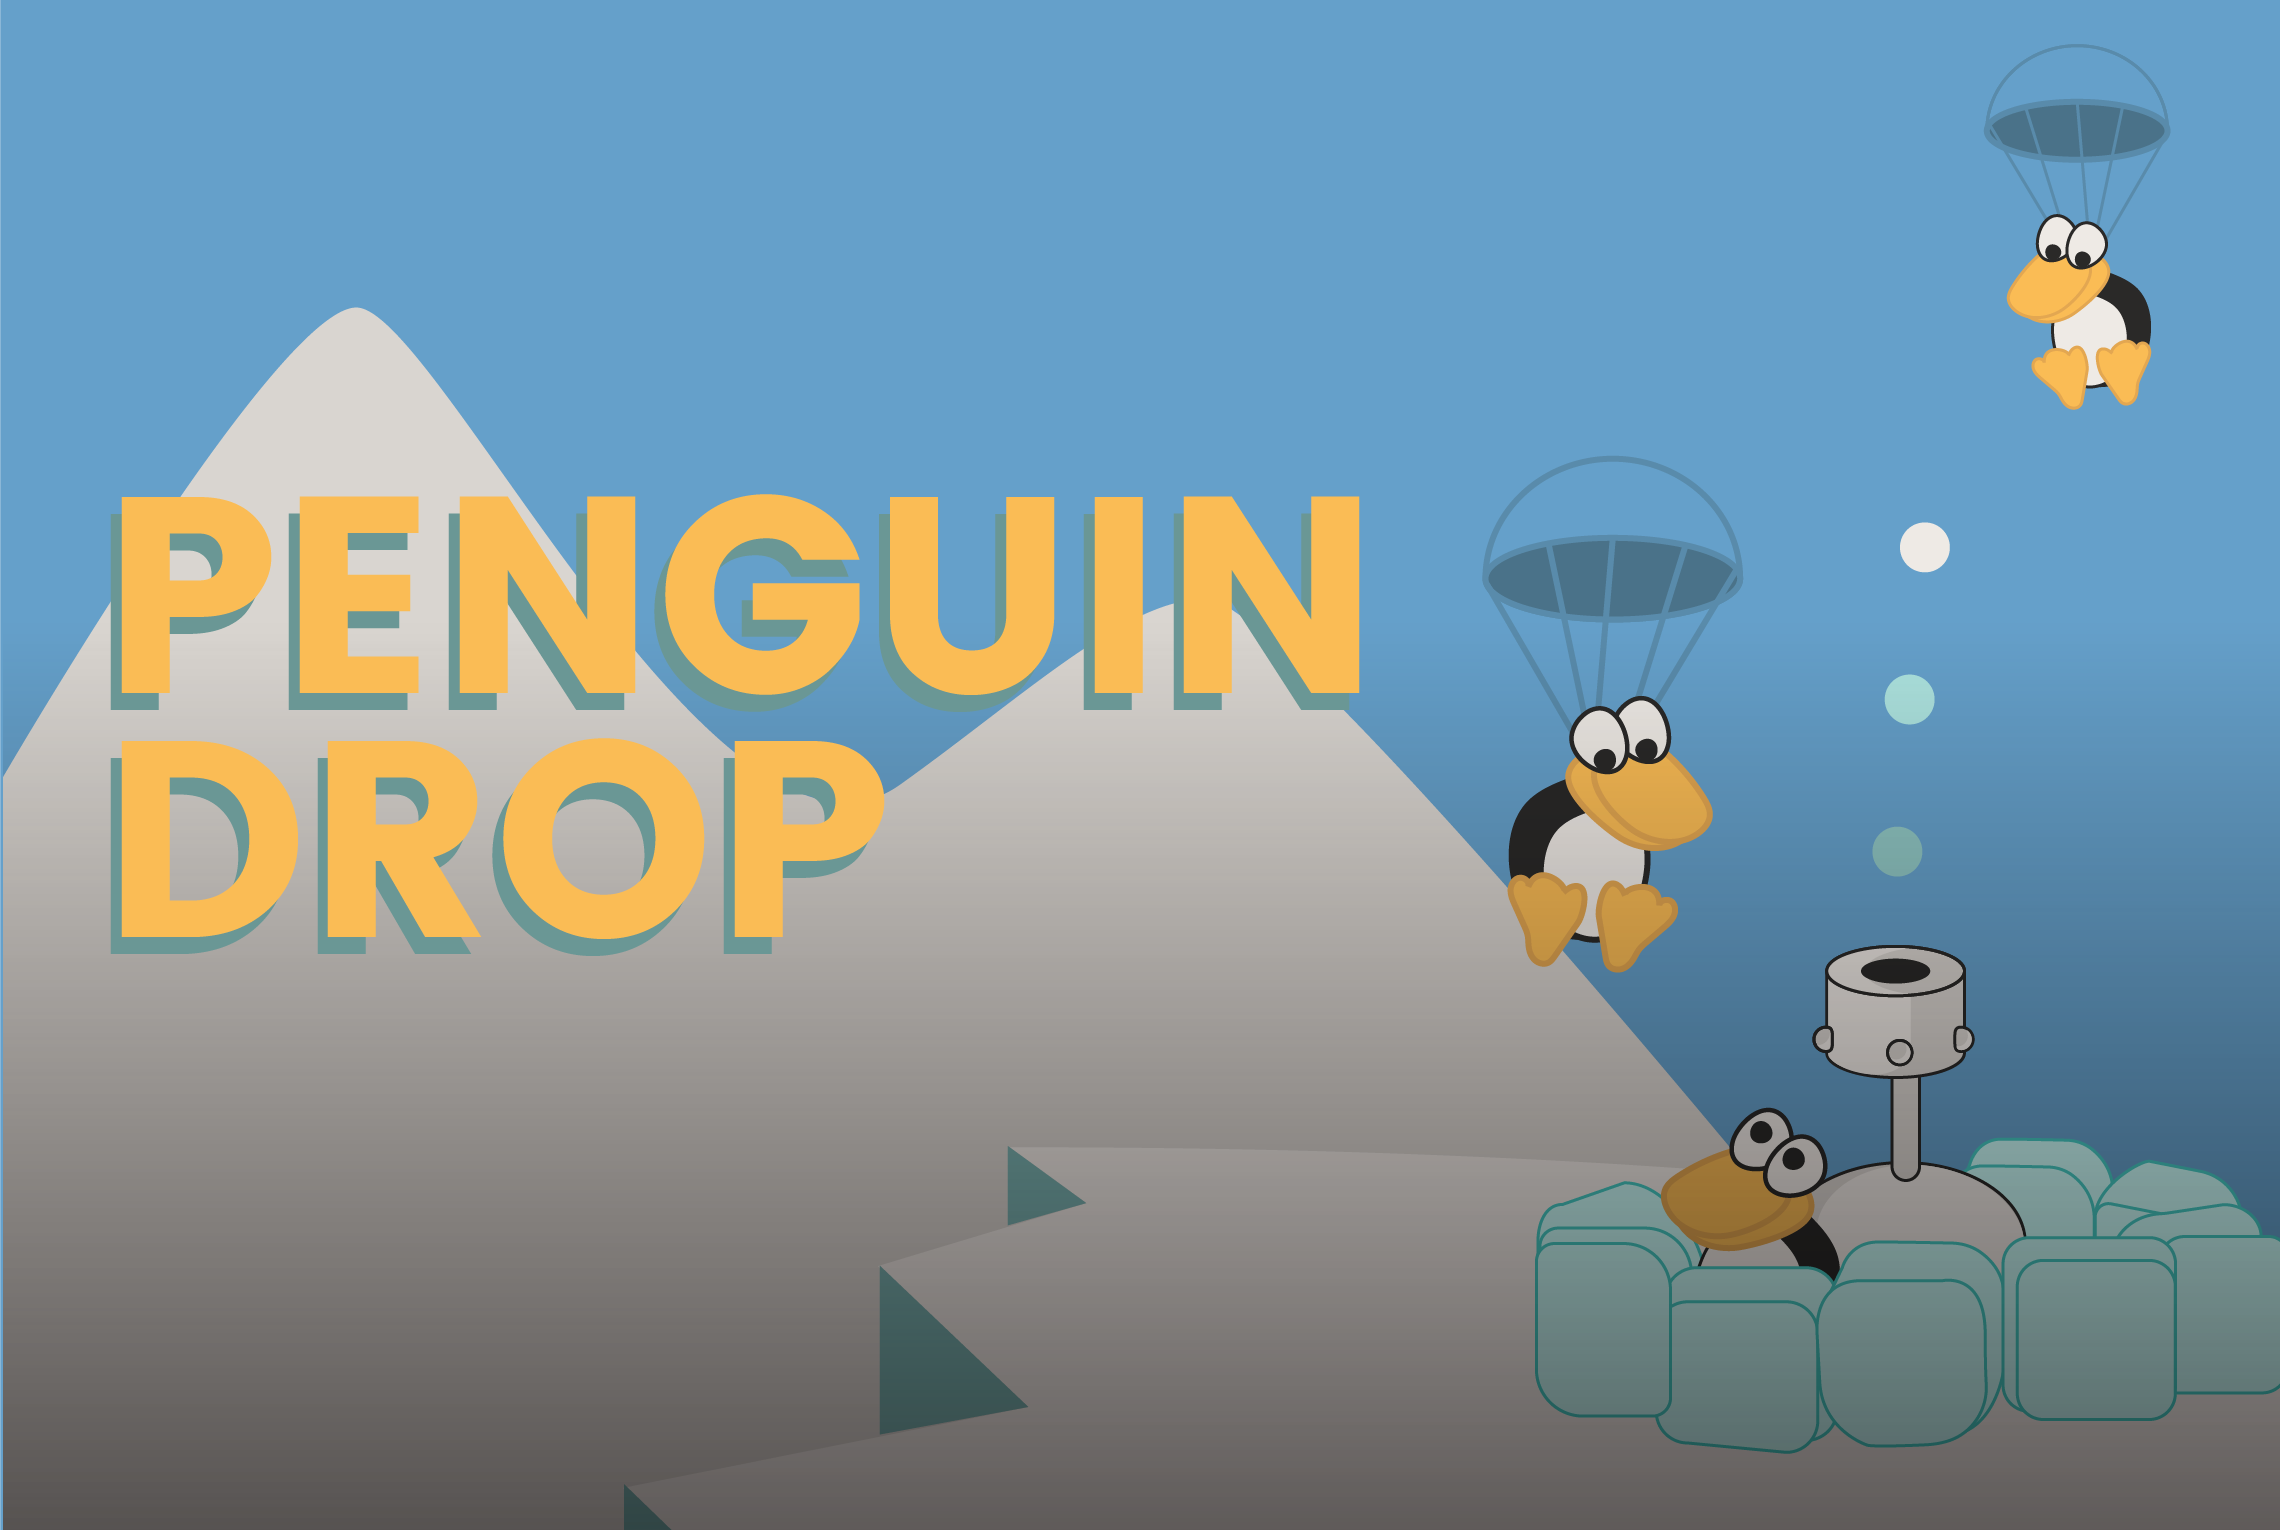 Penguin Drop - a game on Funbrain